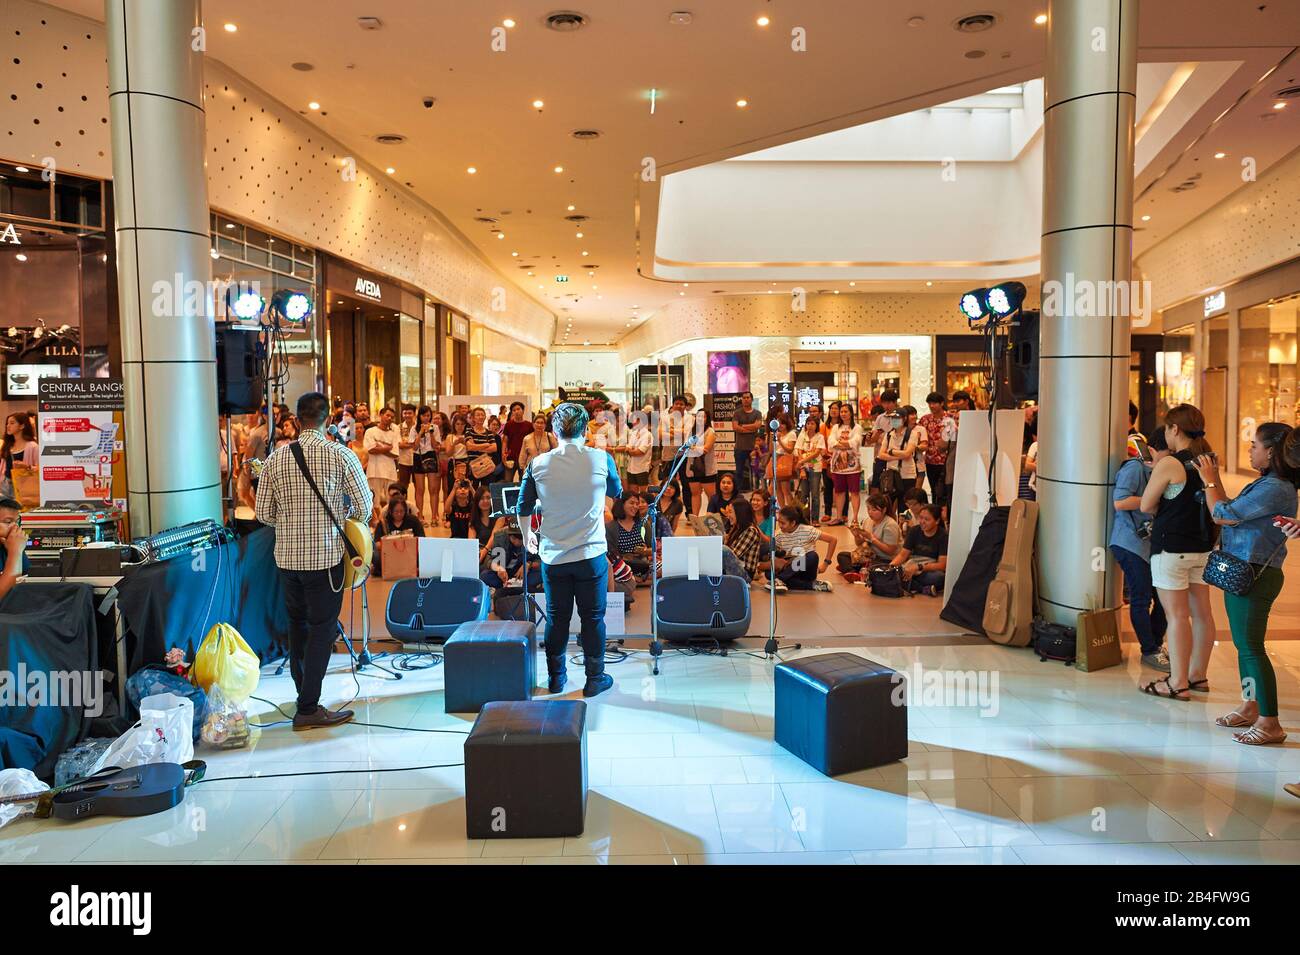 Bangkok's Mall Culture Includes More than Just Shopping [PHOTOS] – WWD